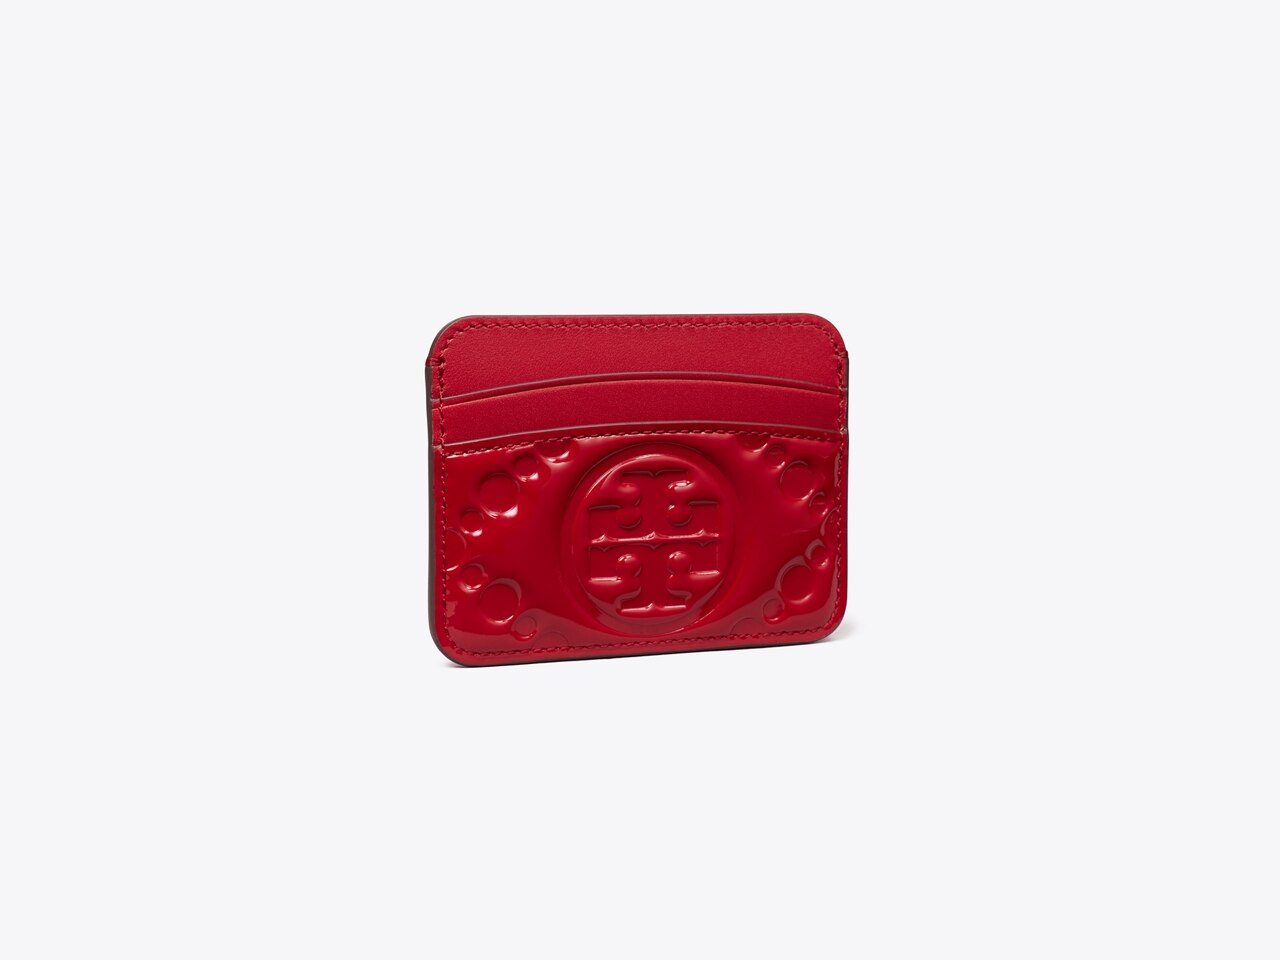 T Monogram Embossed Patent Card Case: Women's Wallets & Card Cases